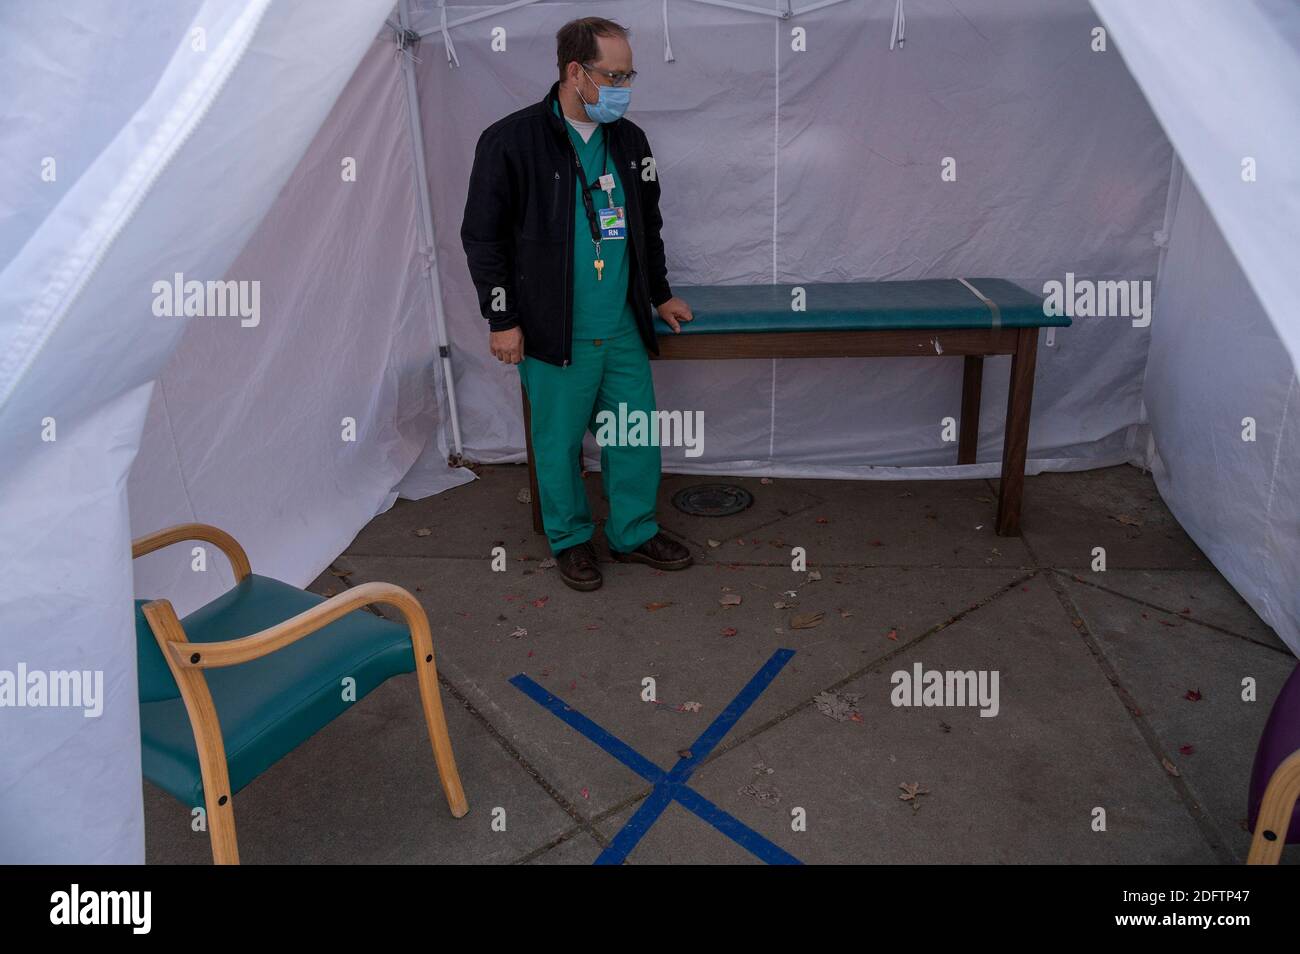 Placerville, California, USA. 2nd Dec, 2020. Jonathan Russell, RN, and chief ambulatory officer, stands inside a physical exam tent outside of Marshall Medical Center's clinic that is used to exam COVID suspect and positive patients in Placerville, CA on Wednesday, Dec. 2, 2020. 'This is one of the COVID modifications we had to make recently,'' said Russell. Credit: Renée C. Byer/ZUMA Wire/Alamy Live News Stock Photo